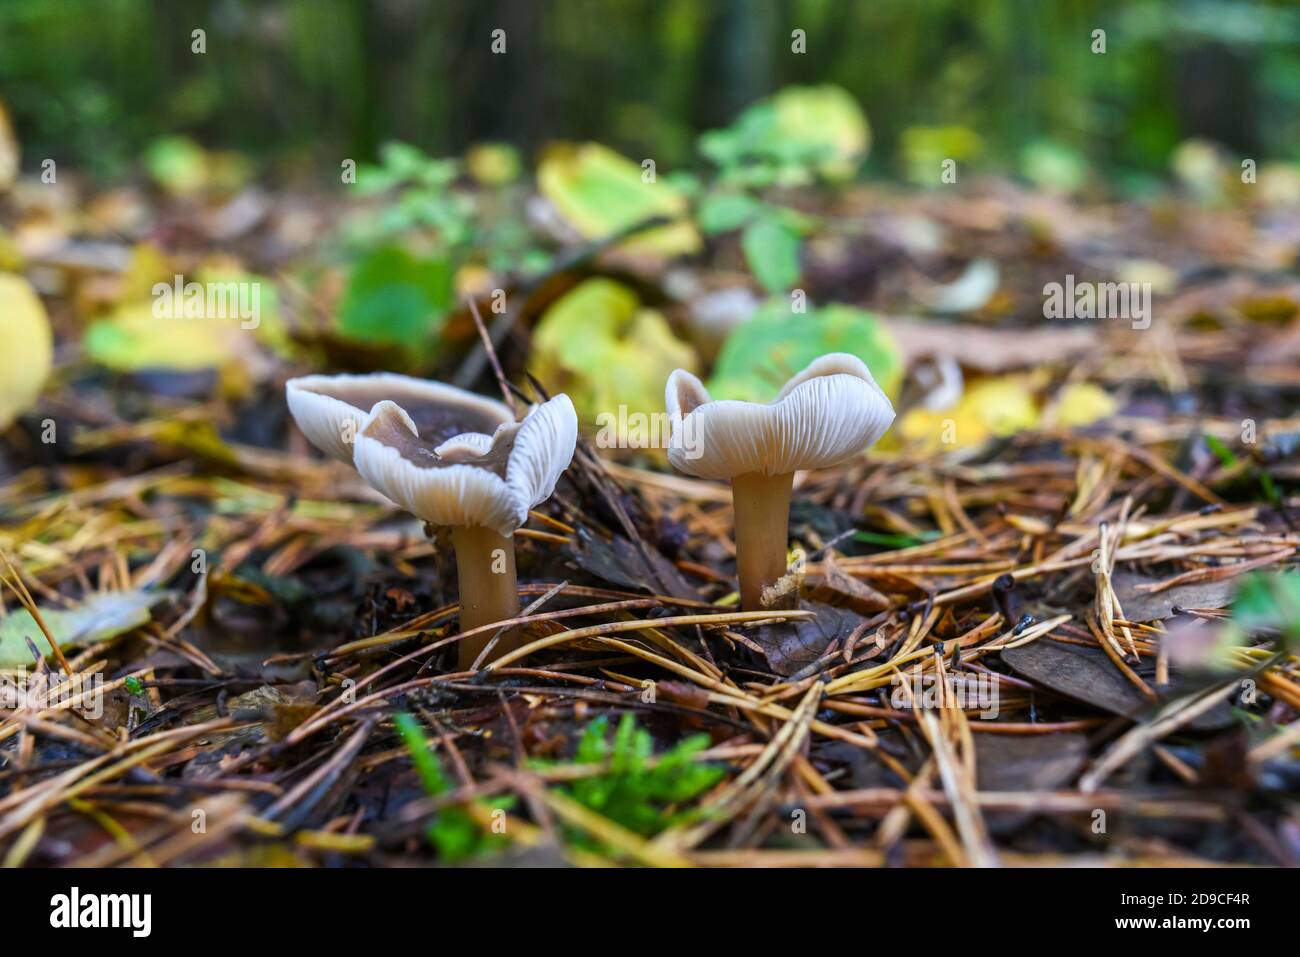 Mushroom in the autumn forest. Autumn forest landscapes Stock Photo